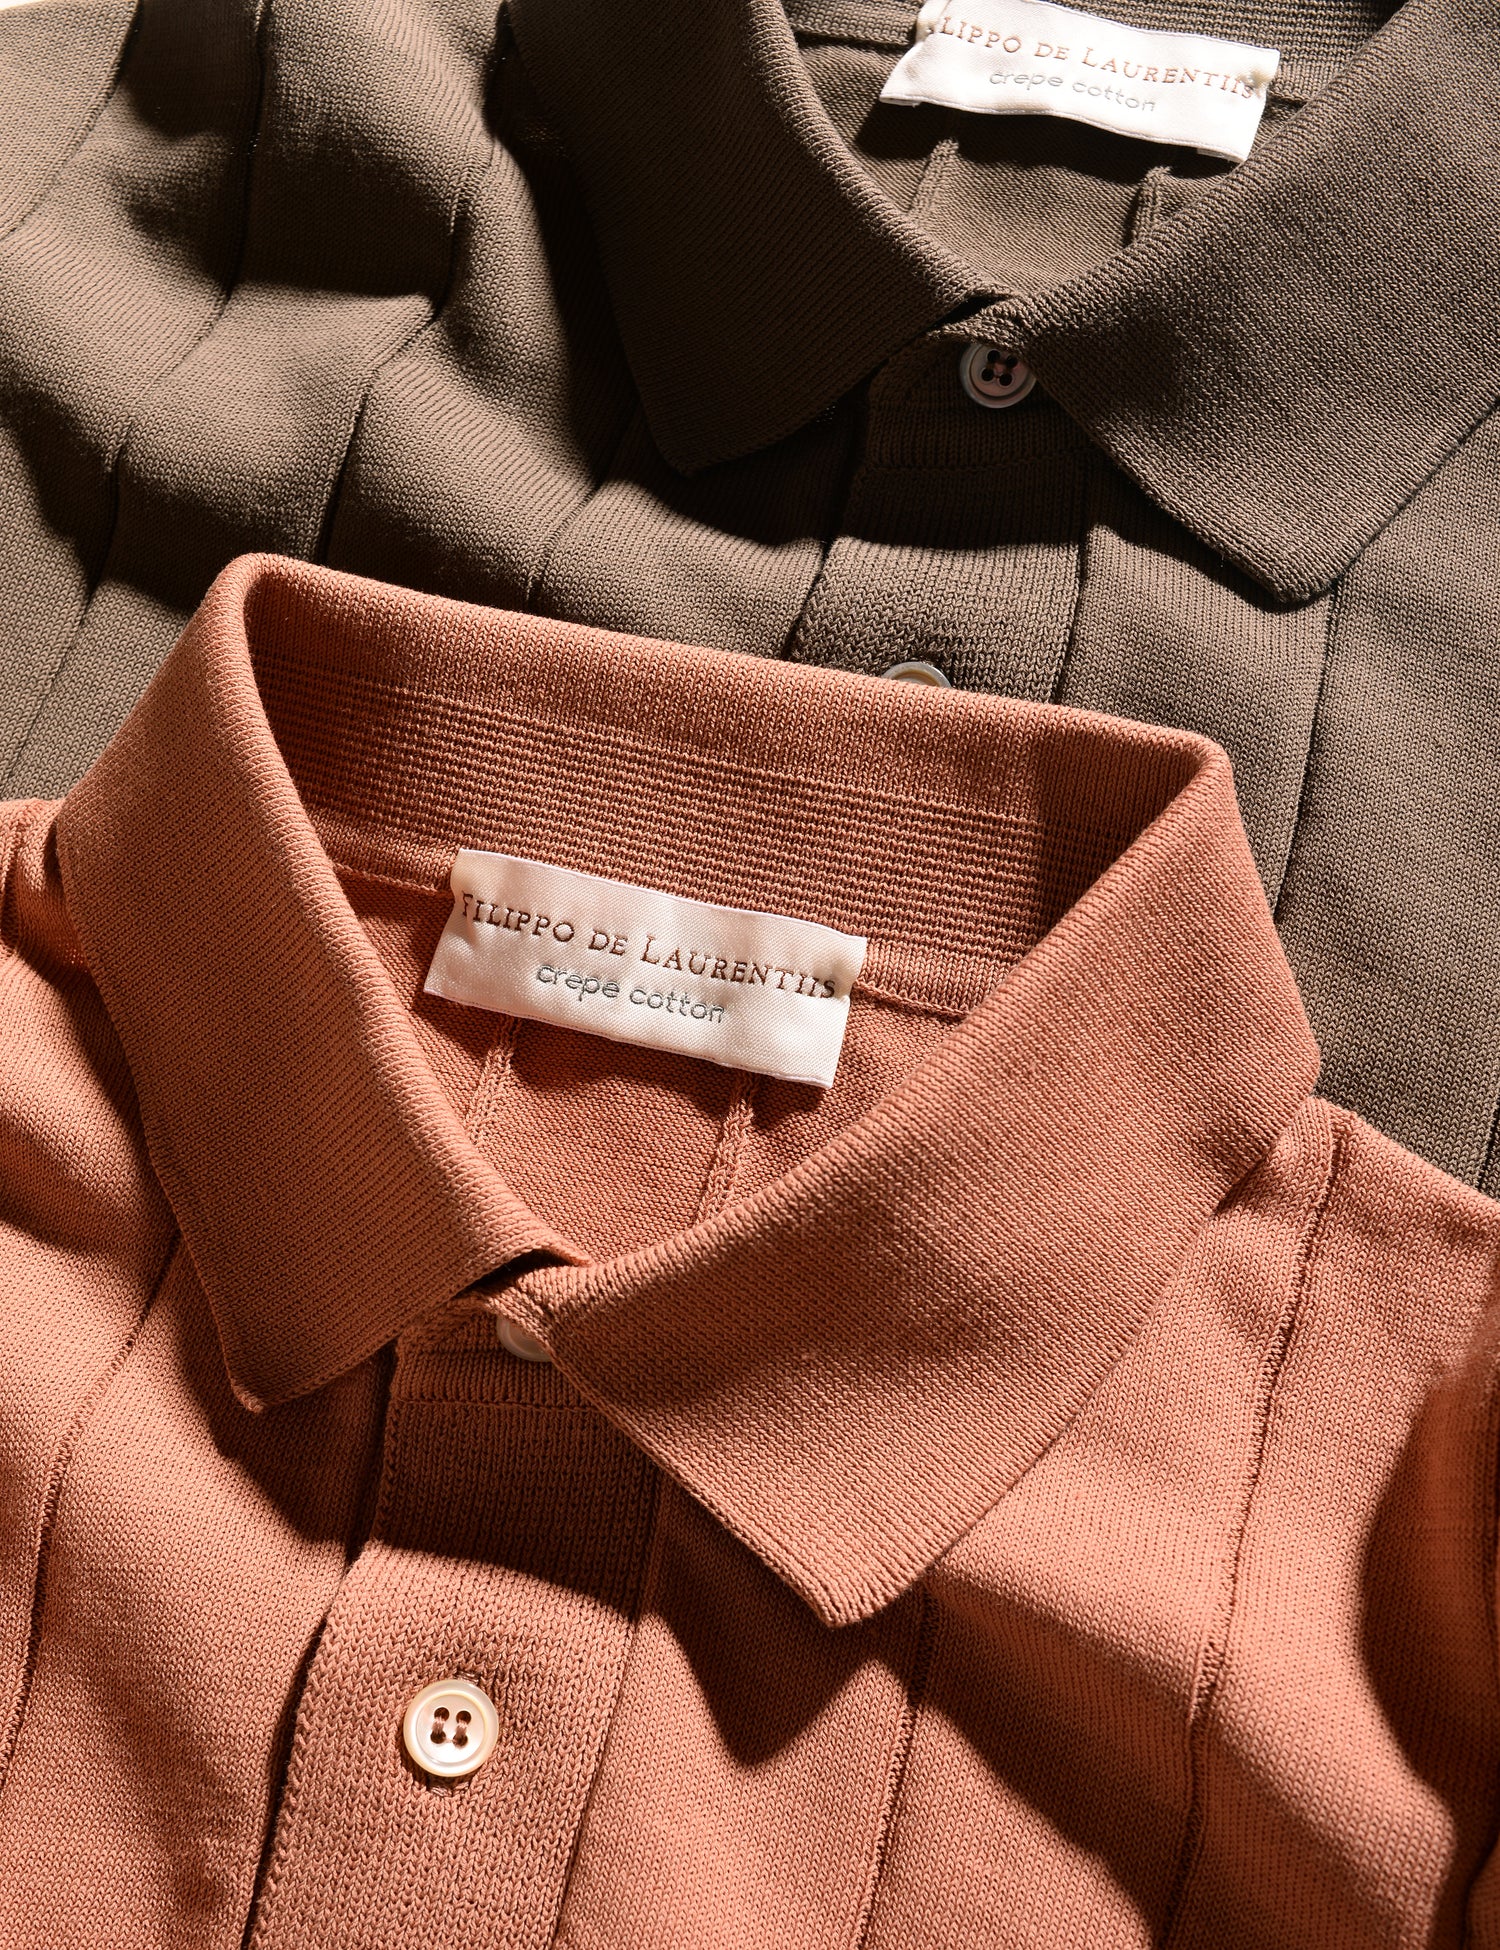 Close-up of two colors of Filippo de Laurentiis crepe cotton ribbed polos showing the colors and collars